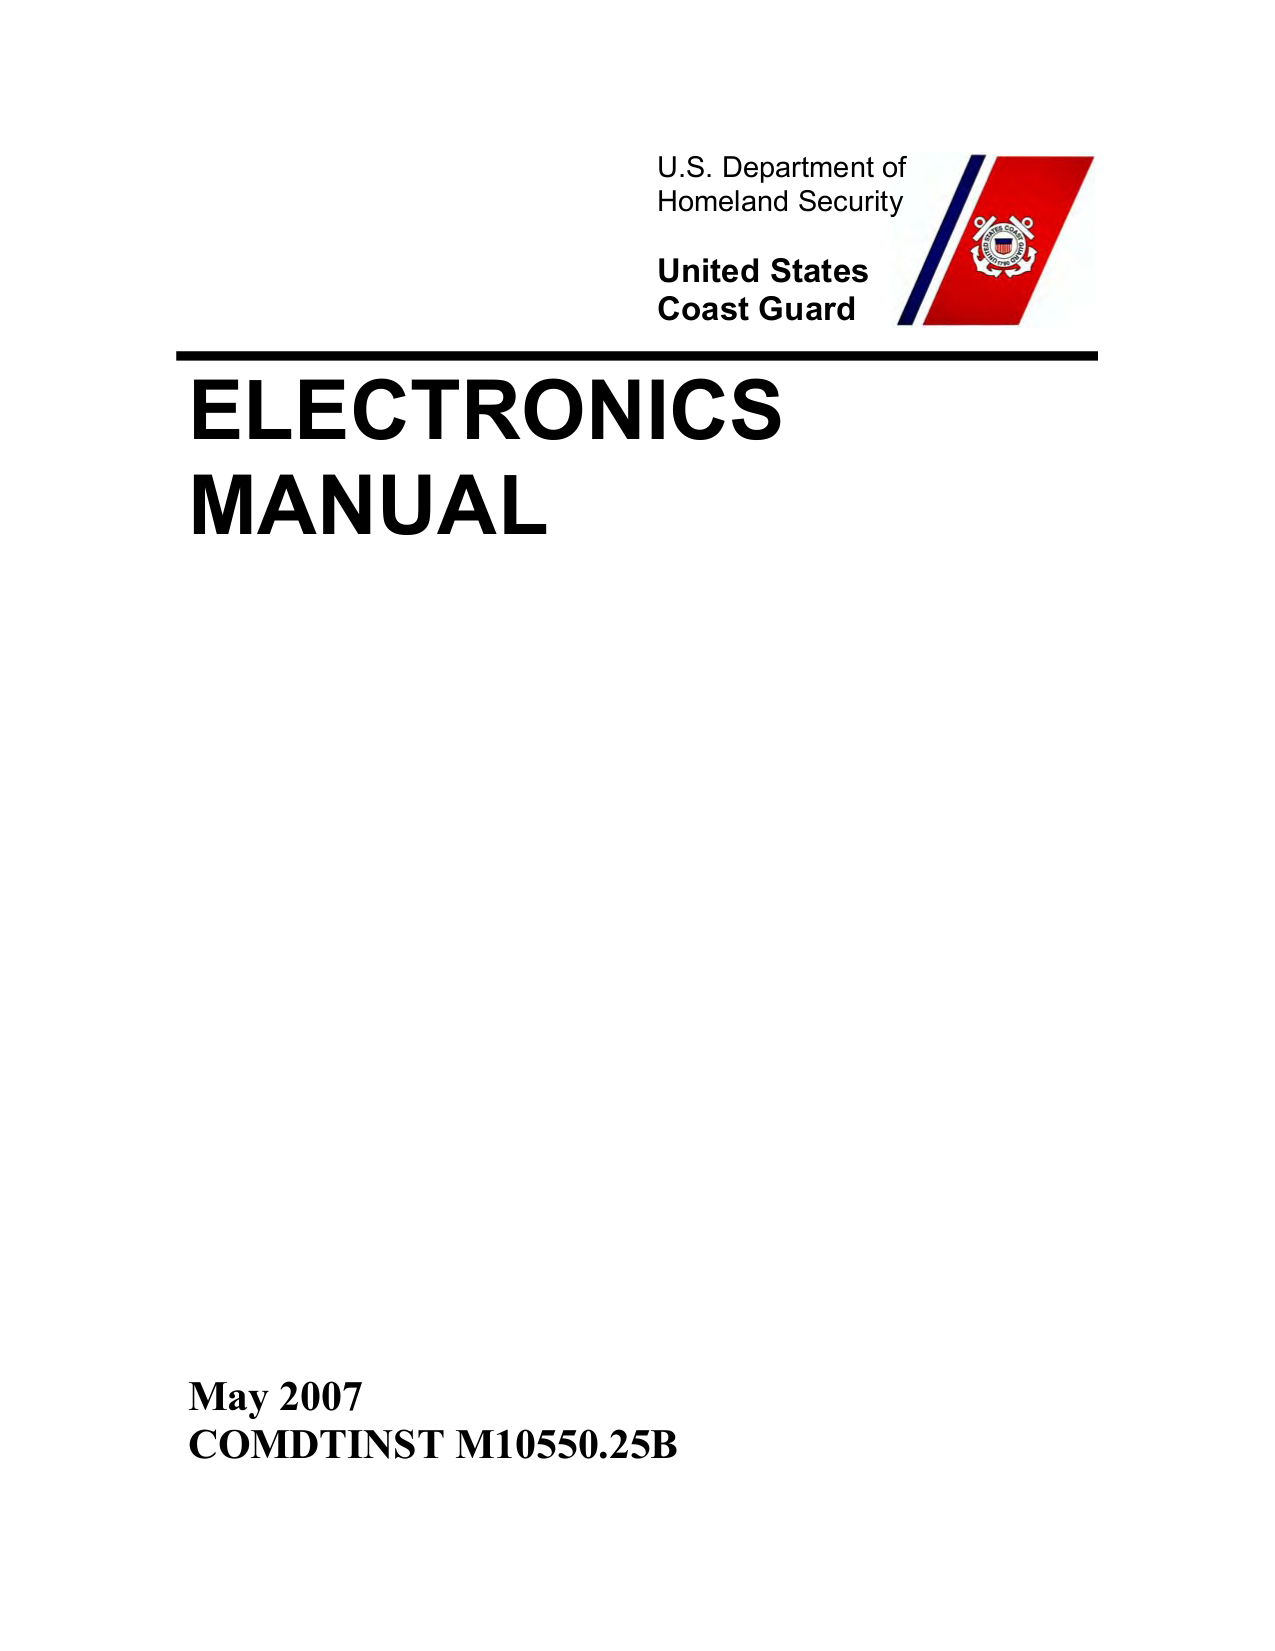 pdf for Teletype Other 1240 GPS Receivers manual